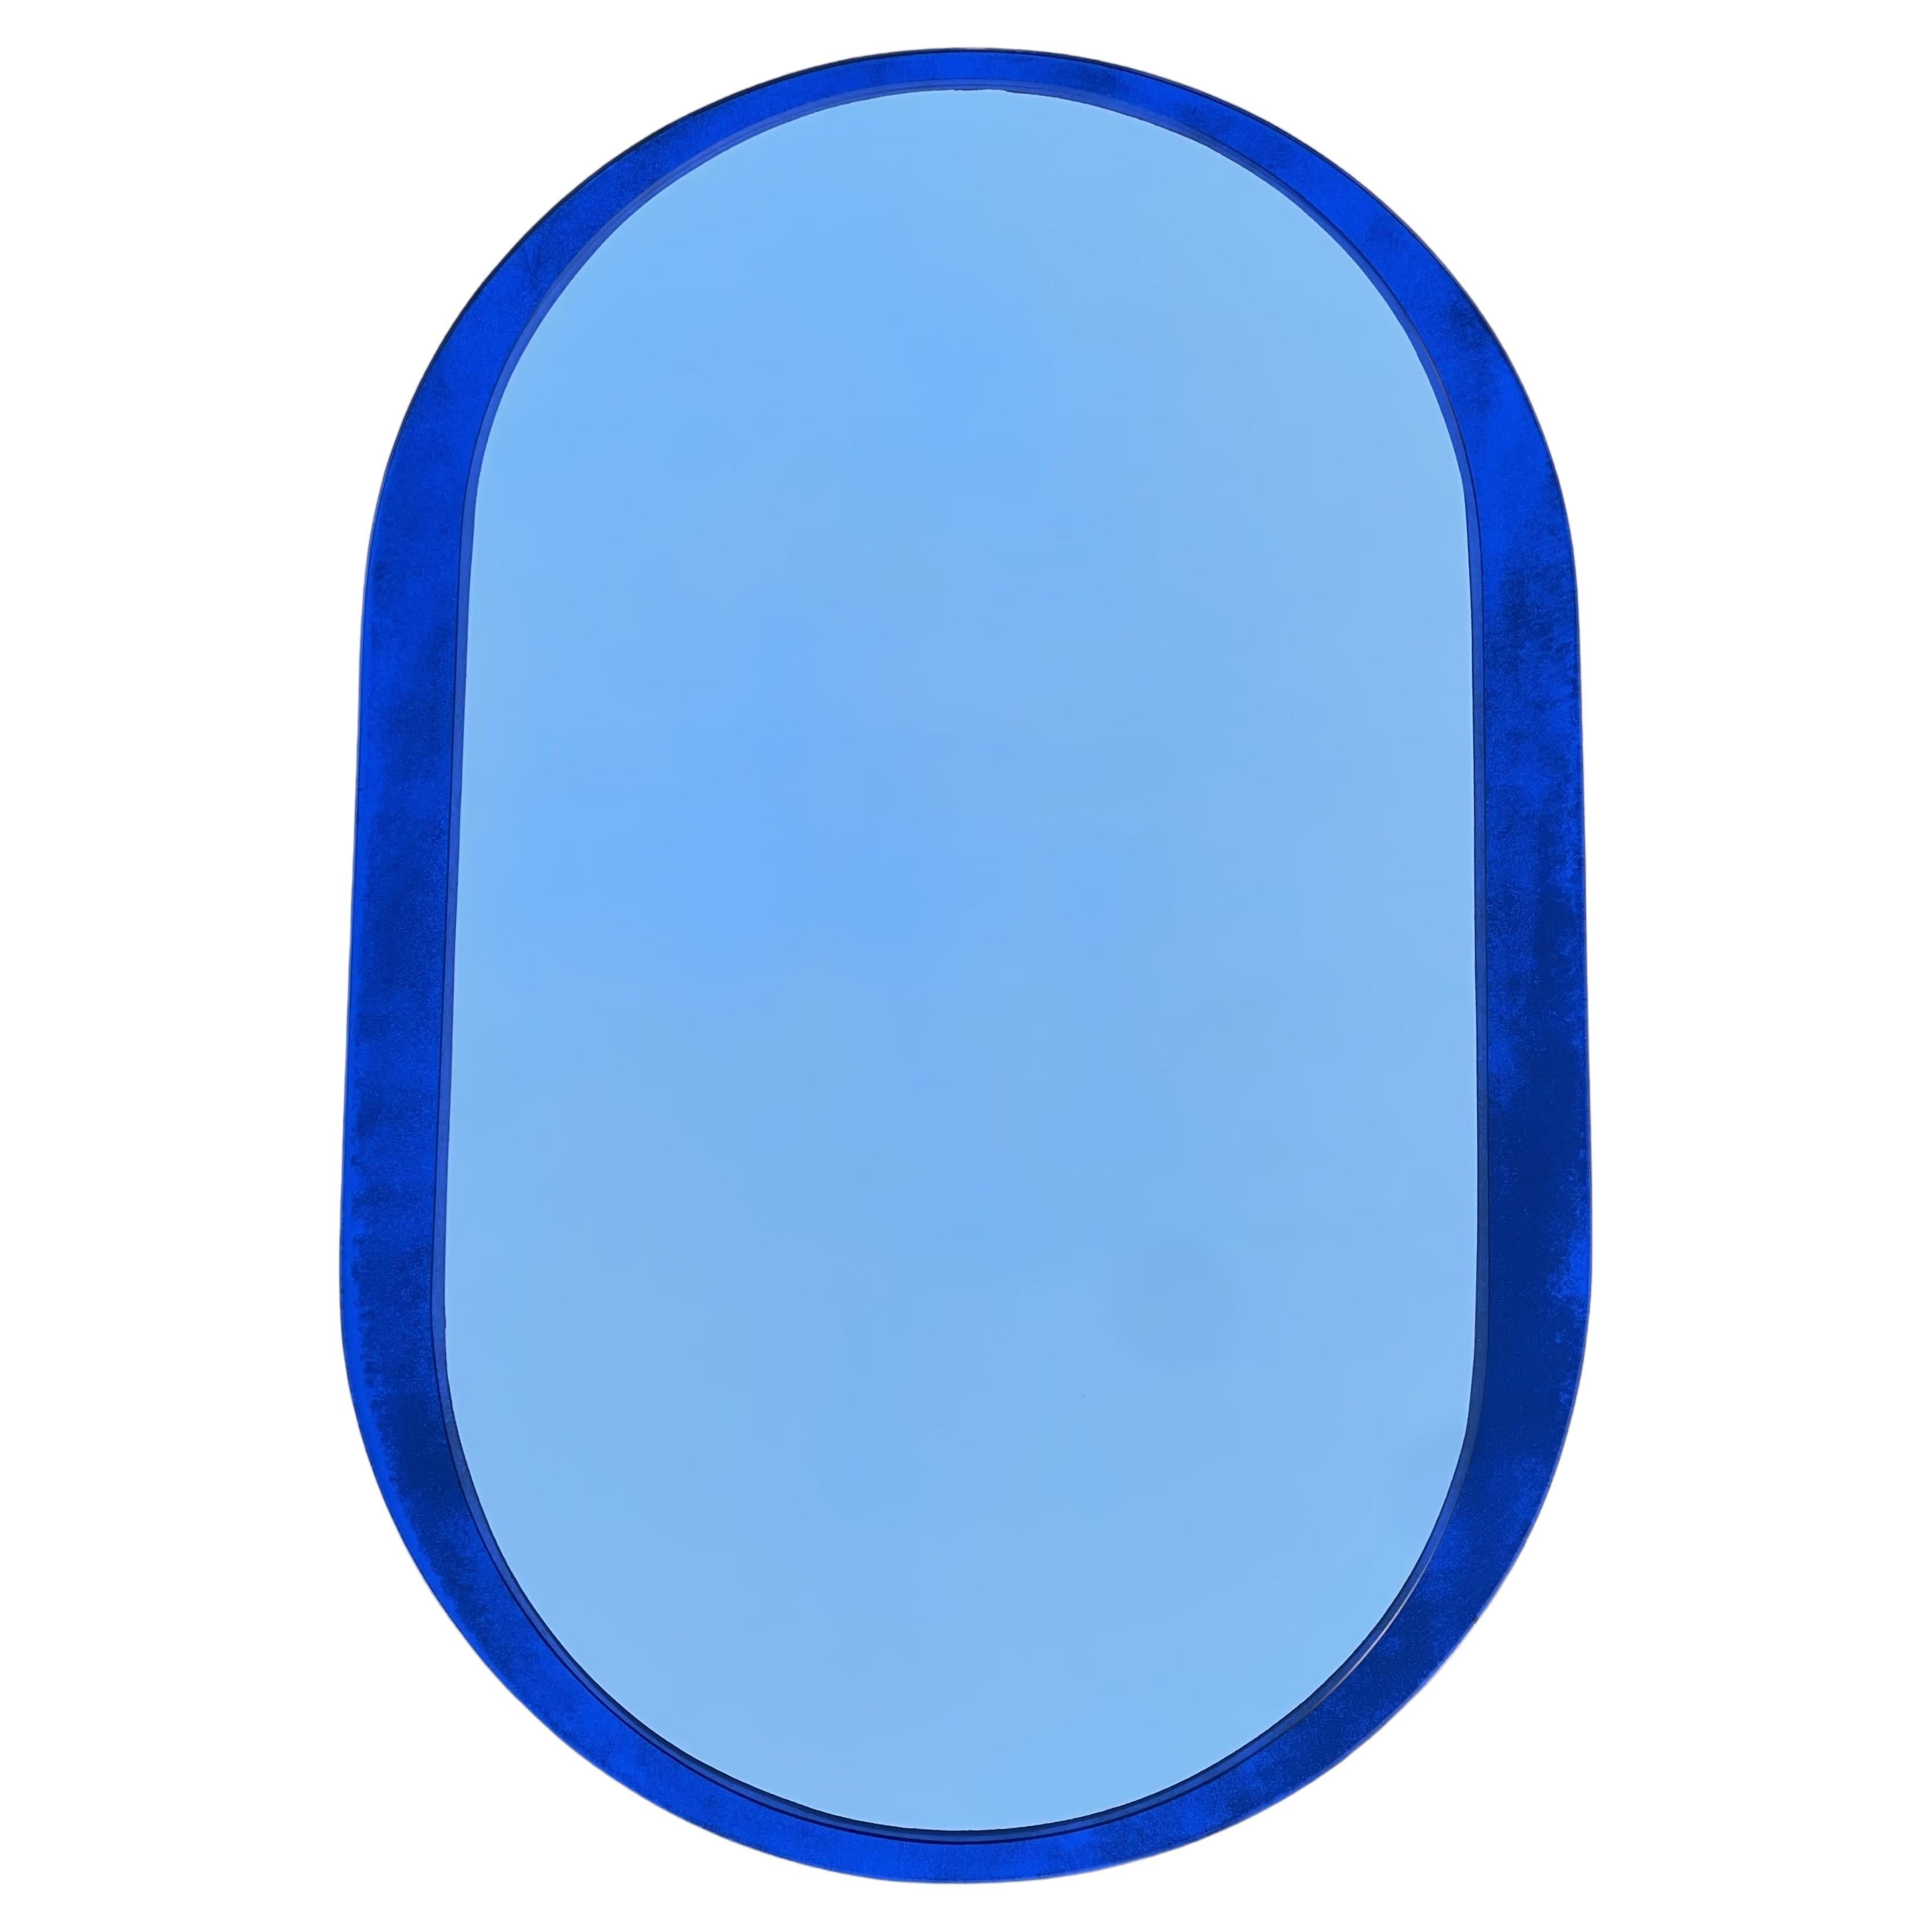 Designer 1970s Veca Made in Italy Mid-Century Modern Wall Cobalt Blue Mirror For Sale